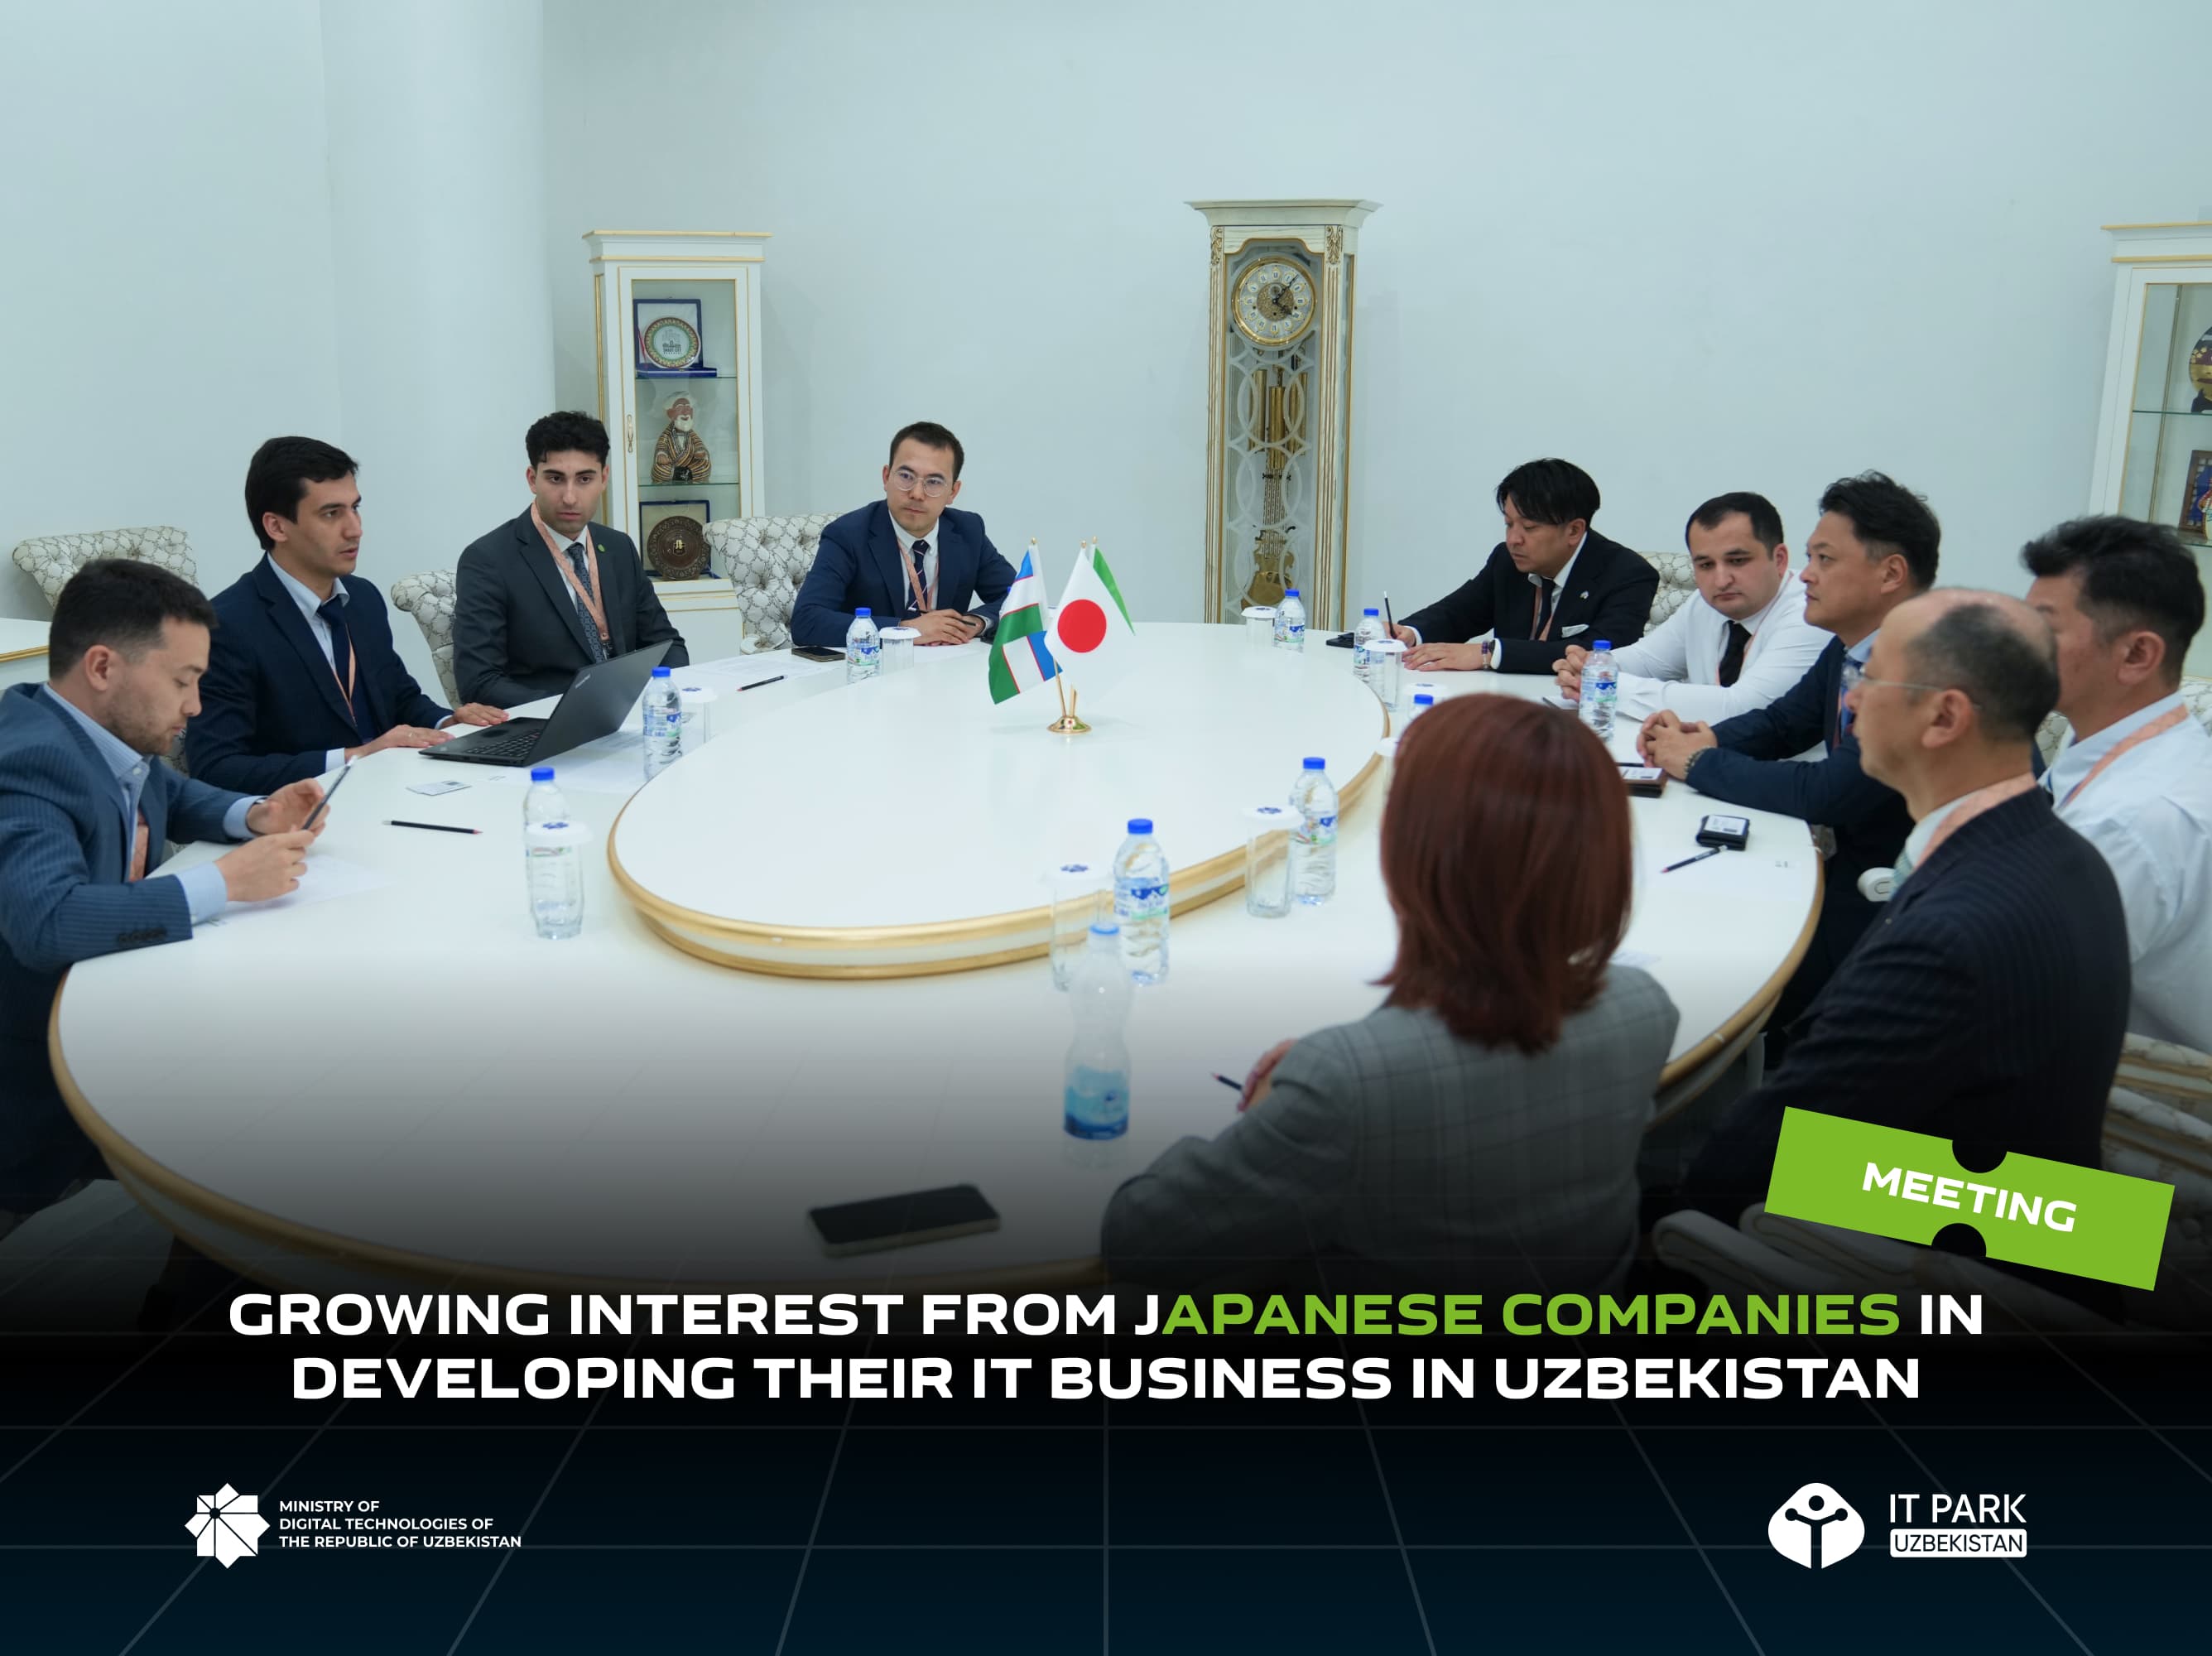 Growing Interest of Japanese Companies in Developing Their IT Business in Uzbekistan